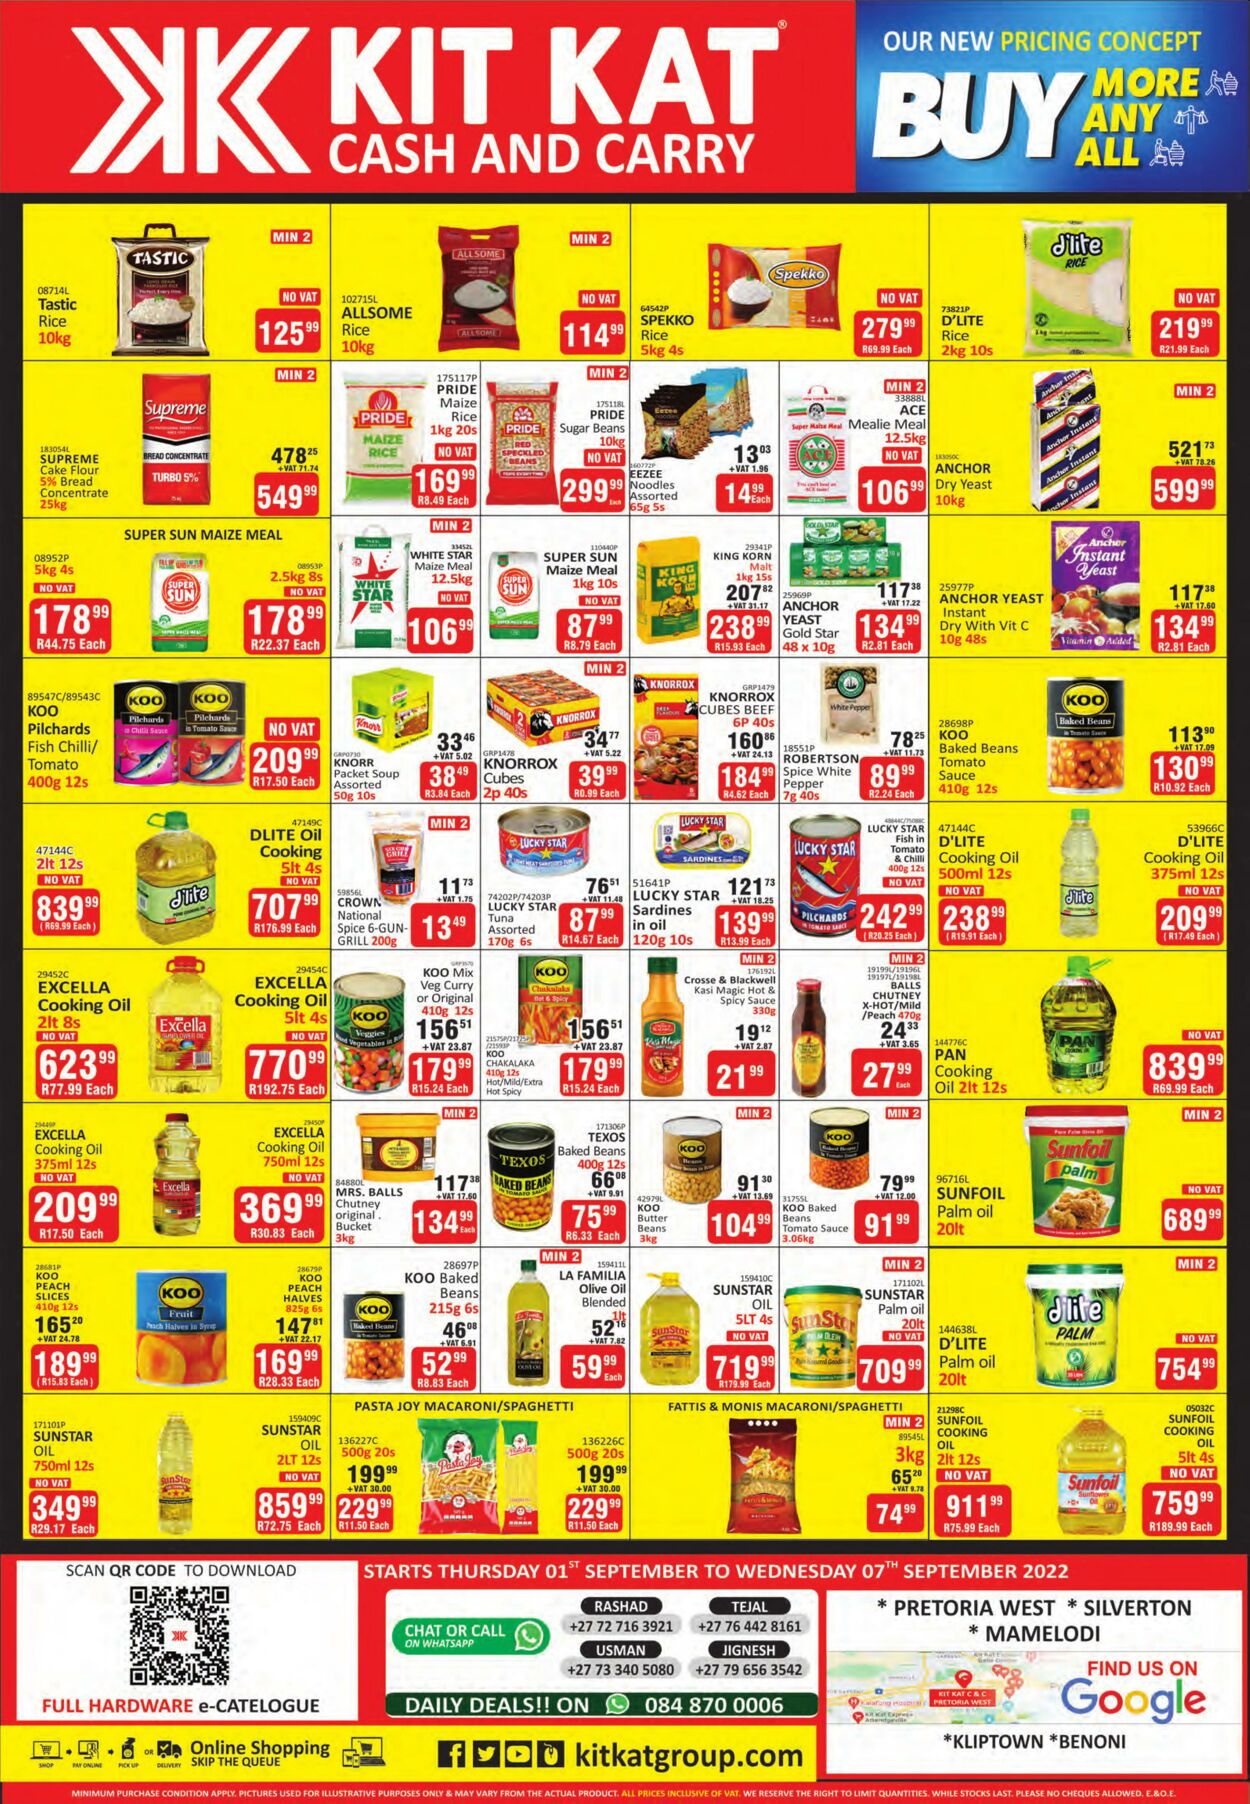 Special Kit Kat Cash and Carry 01.09.2022 - 07.09.2022